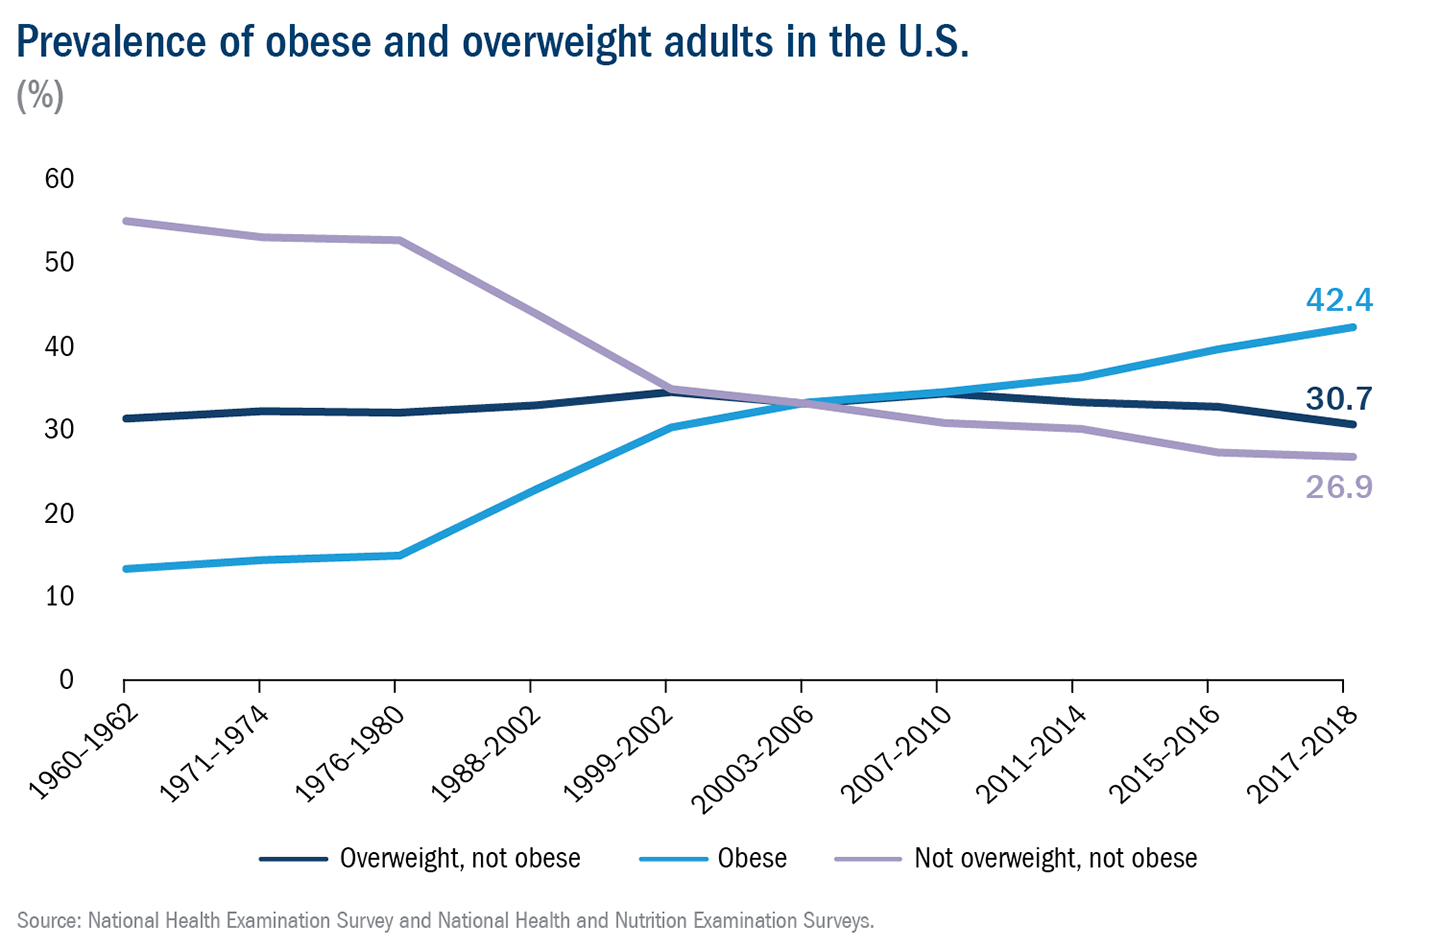 Chart showing the percentage of obese and overweight adults in the U.S. dating back to 1960. The percentage of obese adults has increased from just over 10% in 1960 to 42% of the population in 2018.